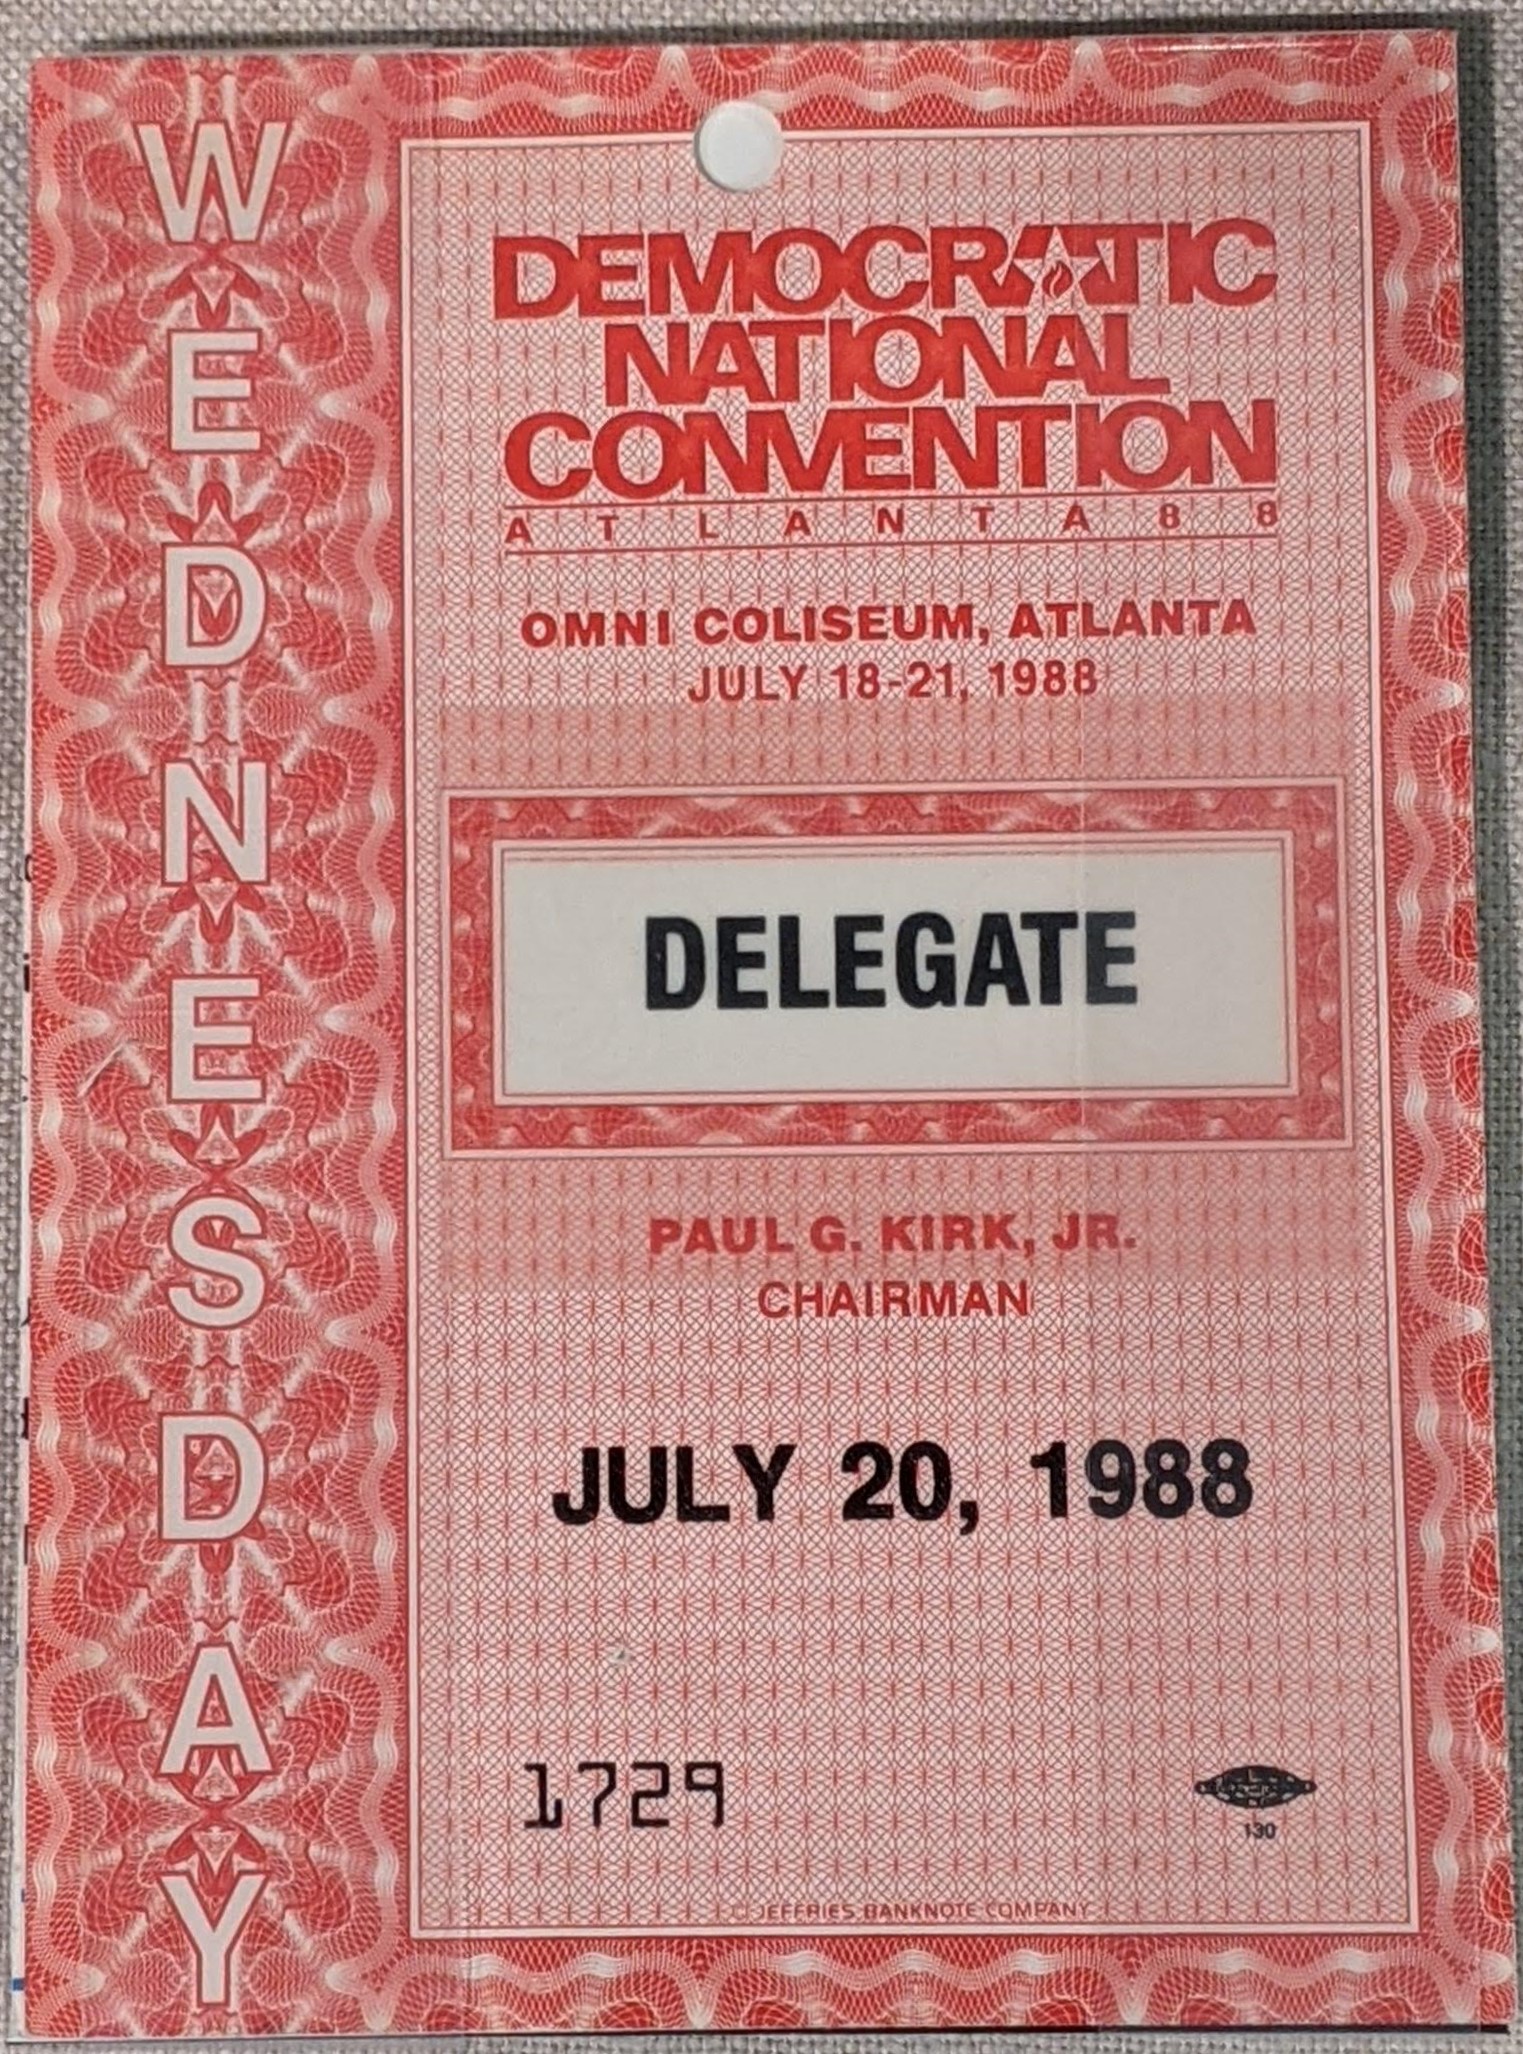 Democratic National Convention 1988 delegate badge for Wednesday, July 20, 1988